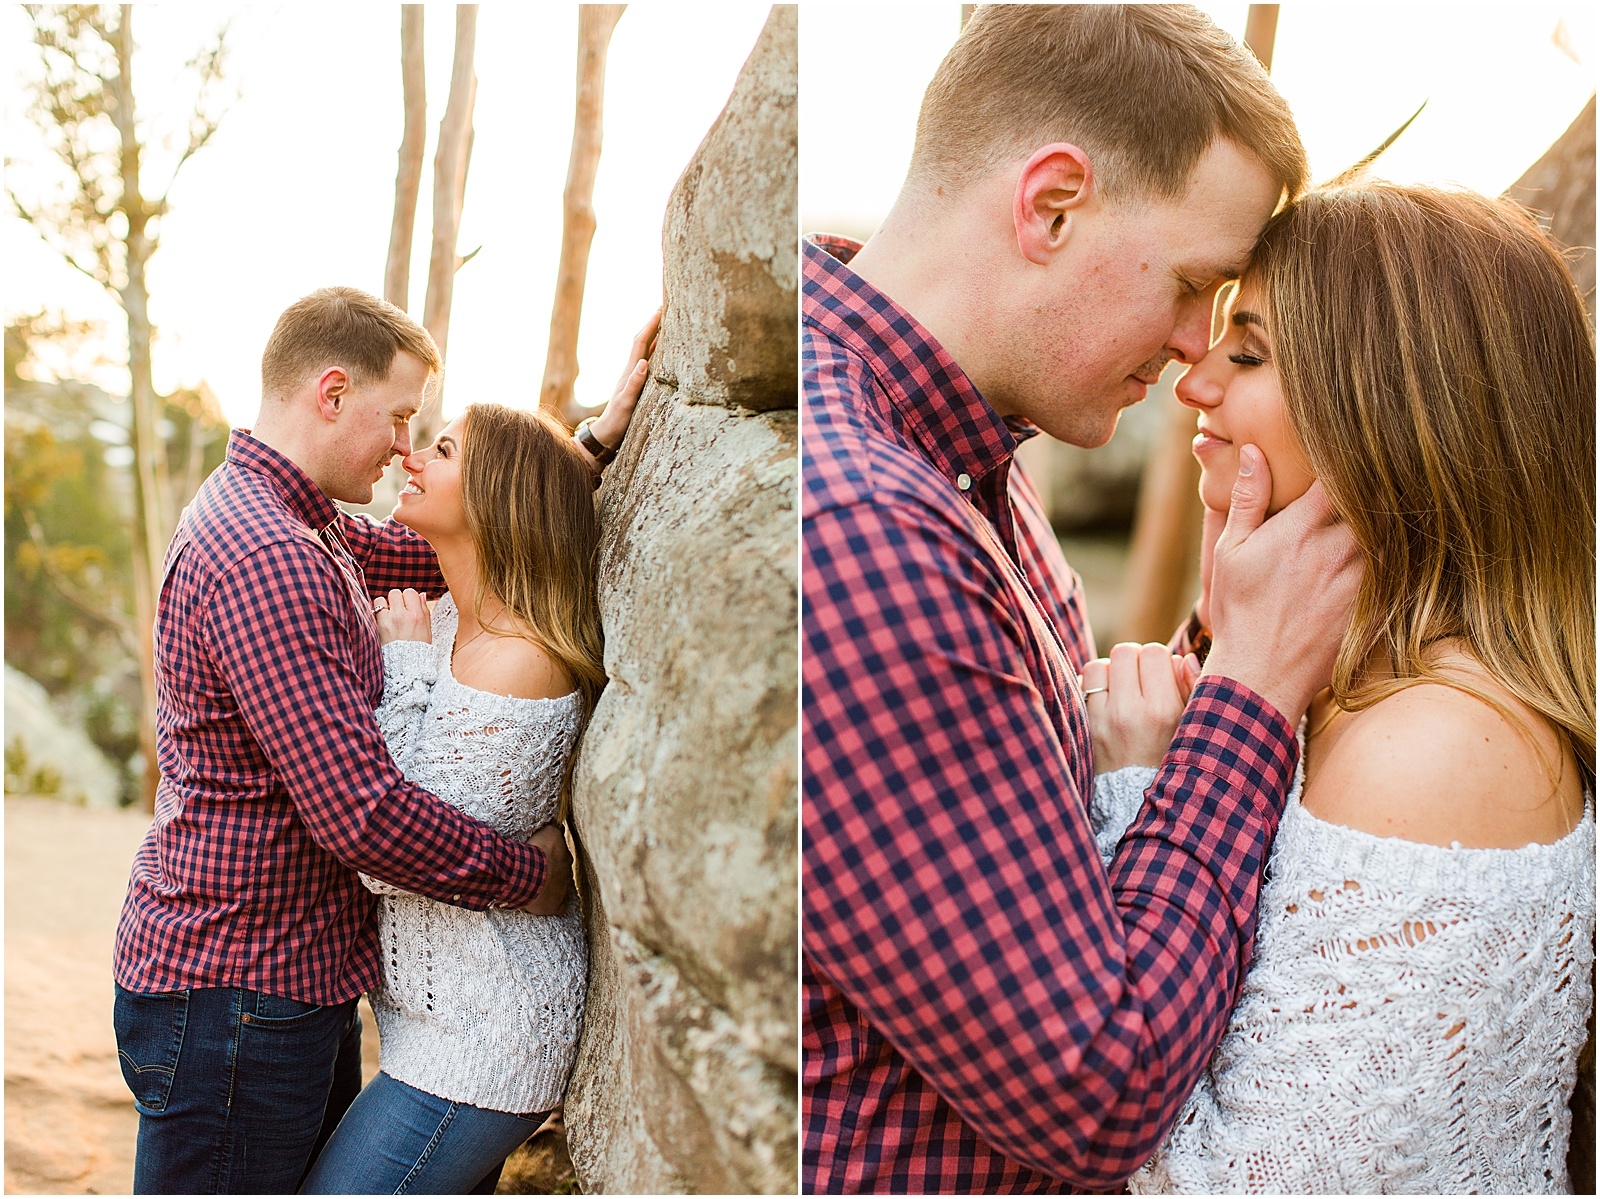 A Sunny Garden of the Gods Engagement Session | Shiloh and Lee | Bret and Brandie Photography067.jpg